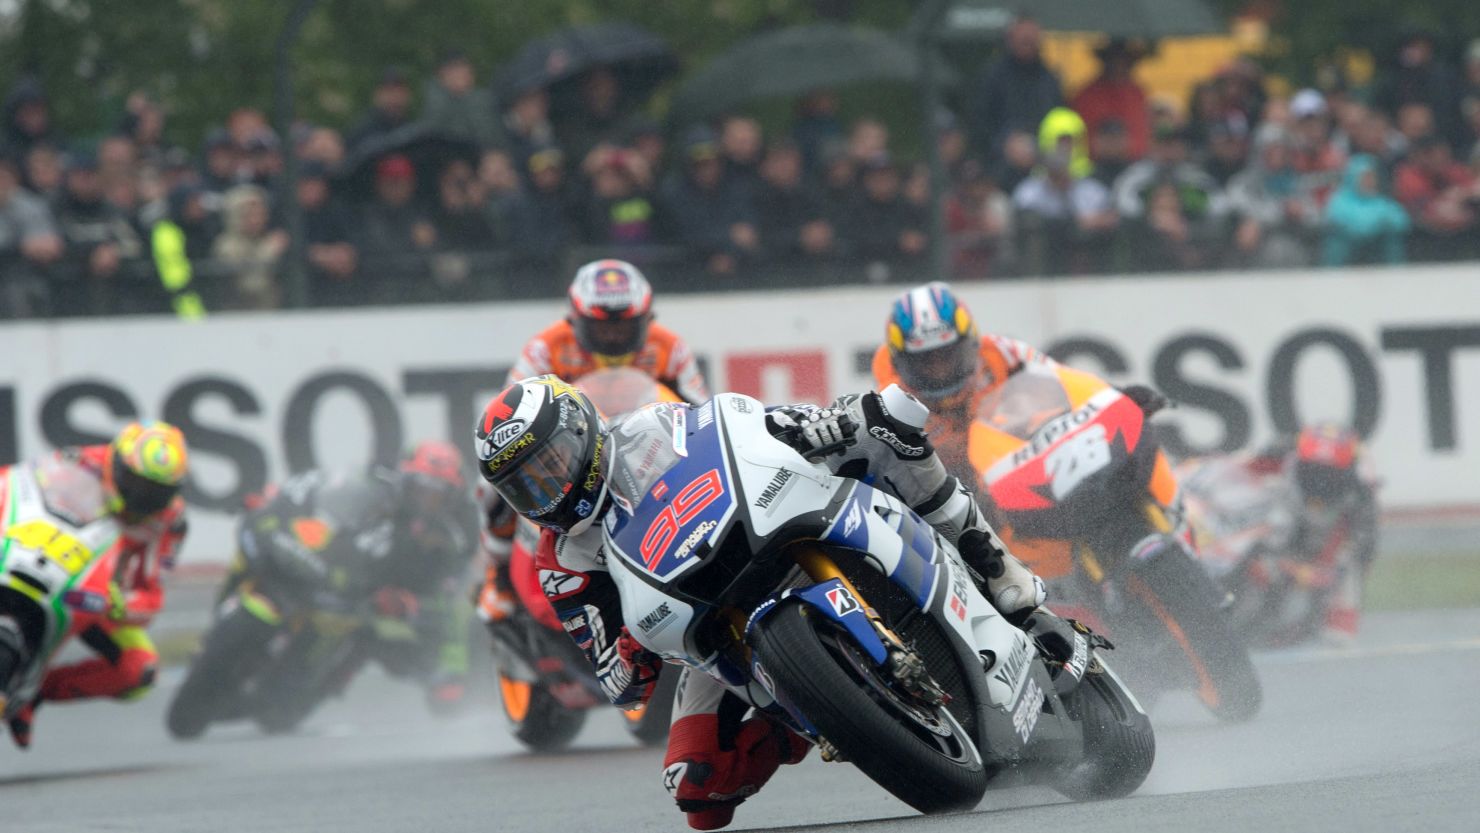 Jorge Lorenzo and second-place Valentine Rossi thrived in the wet conditions at Le Mans